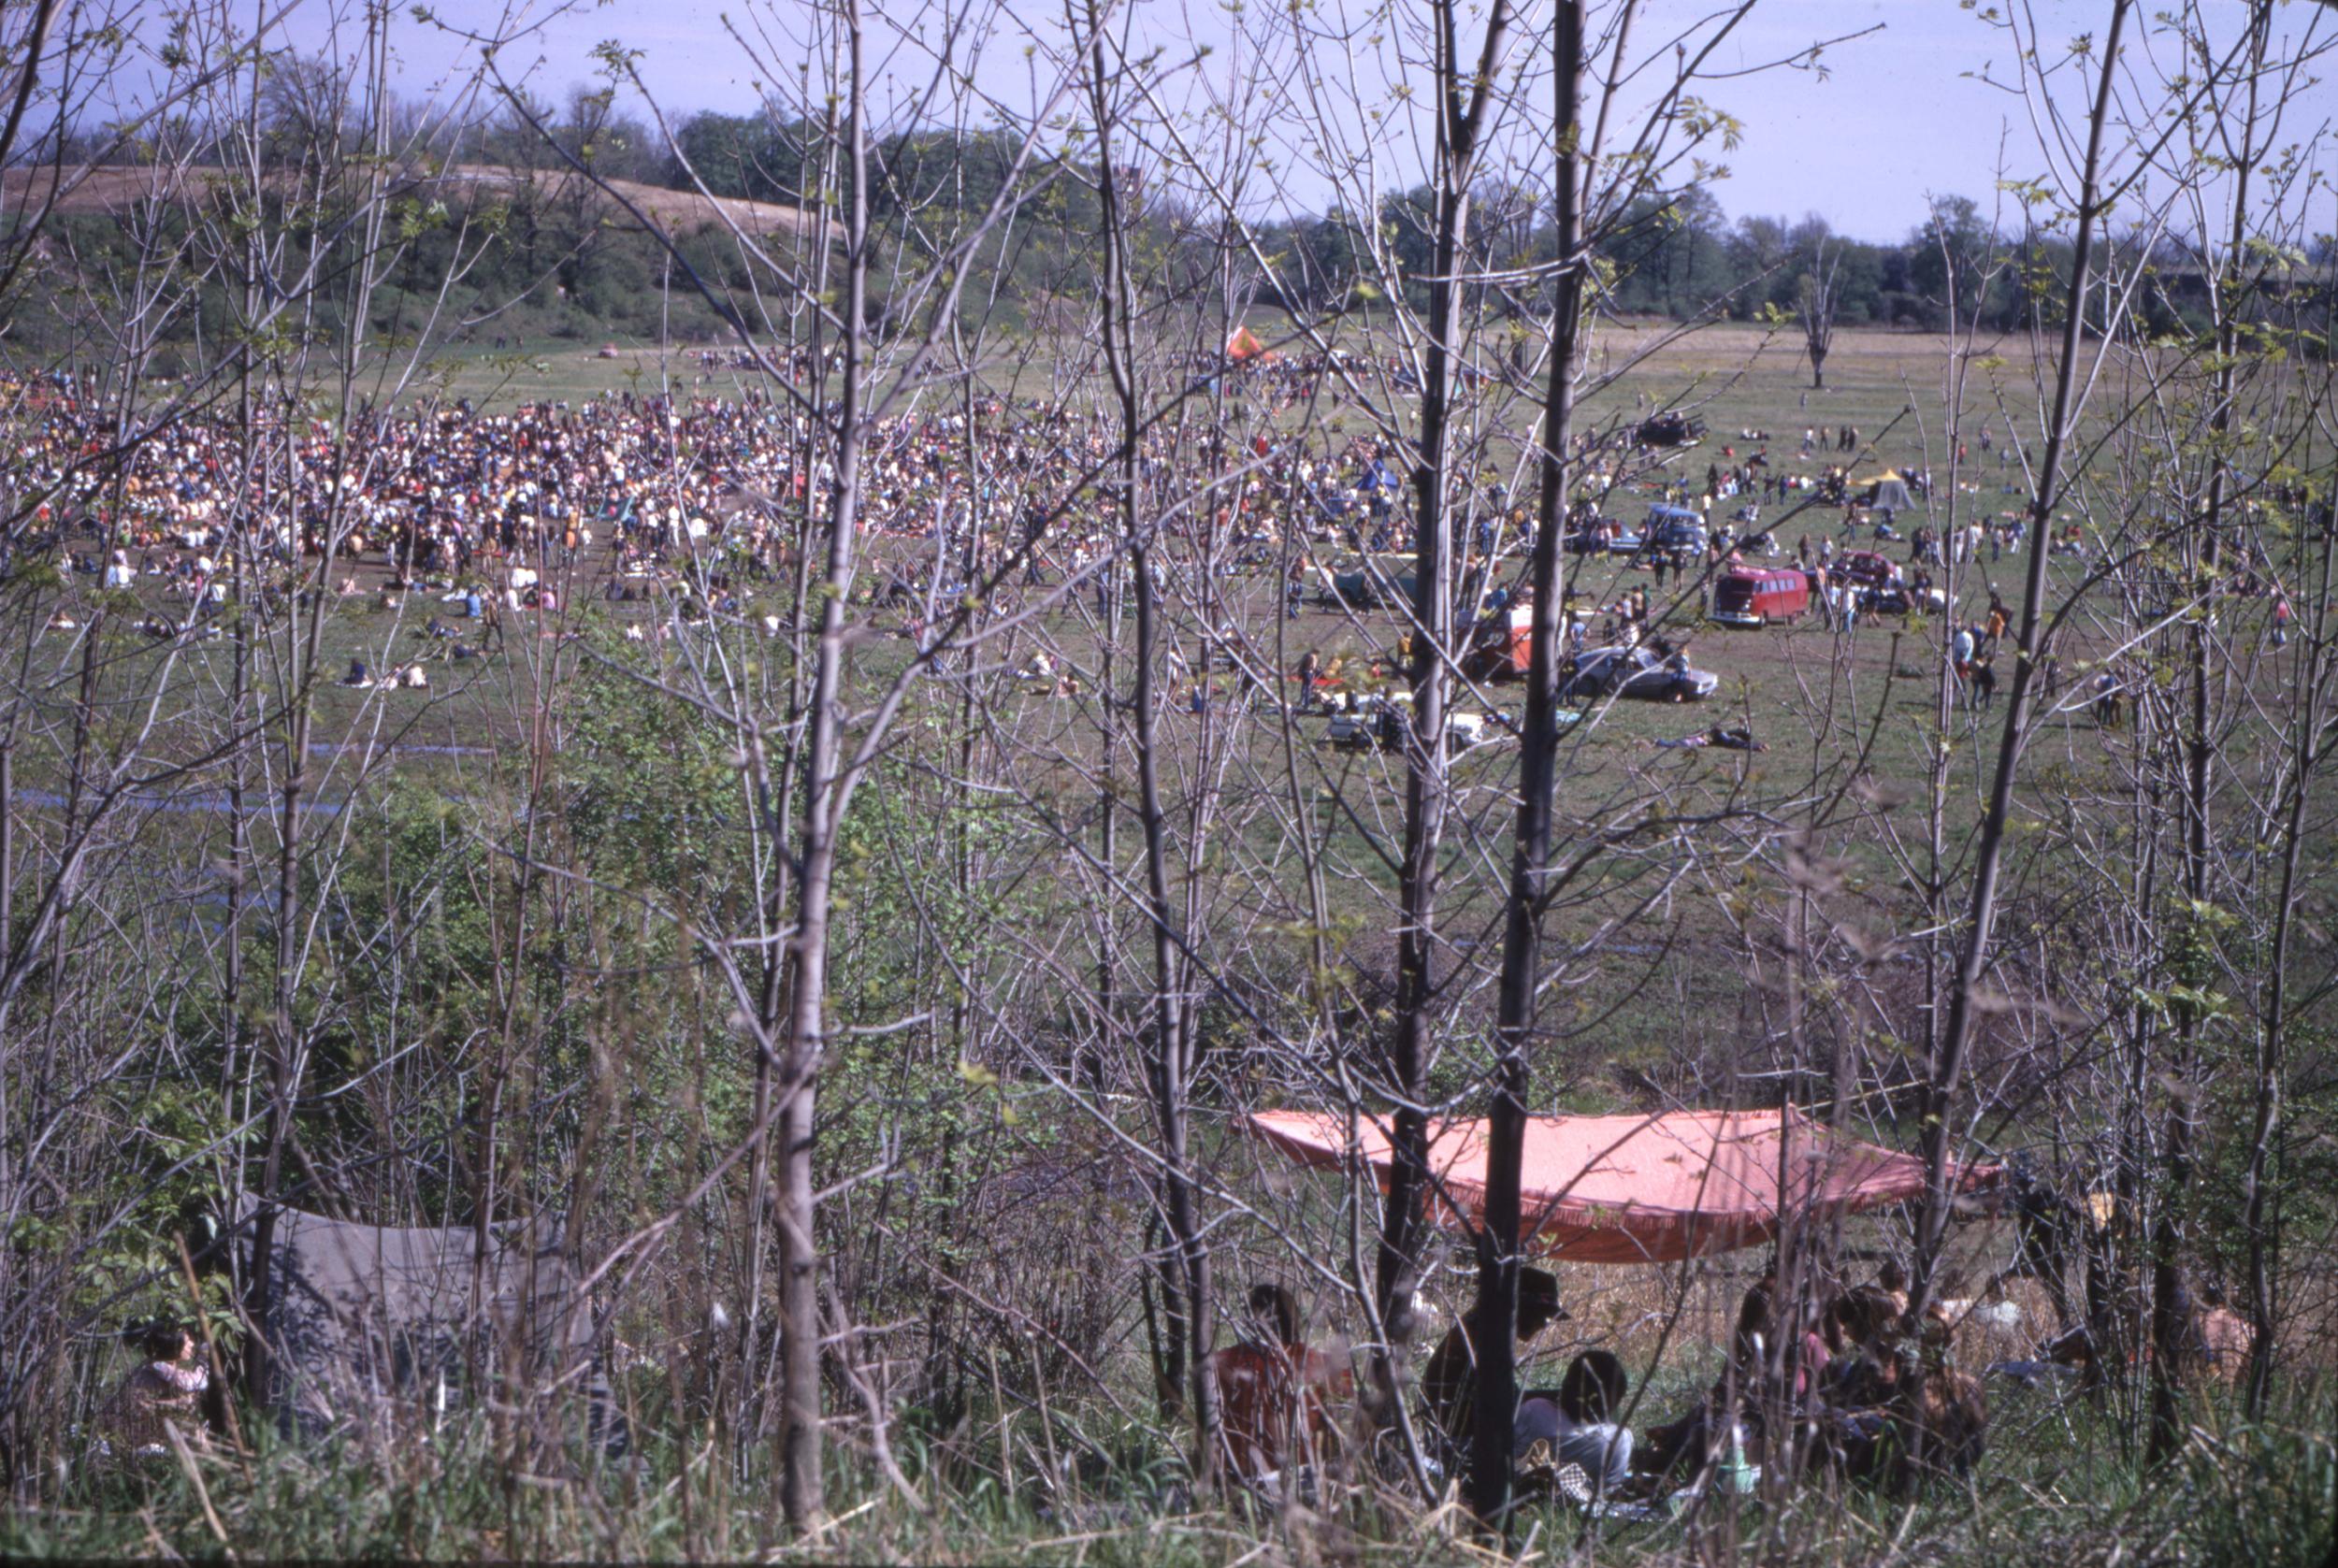 A field filled with people as well as tents and vehicles.